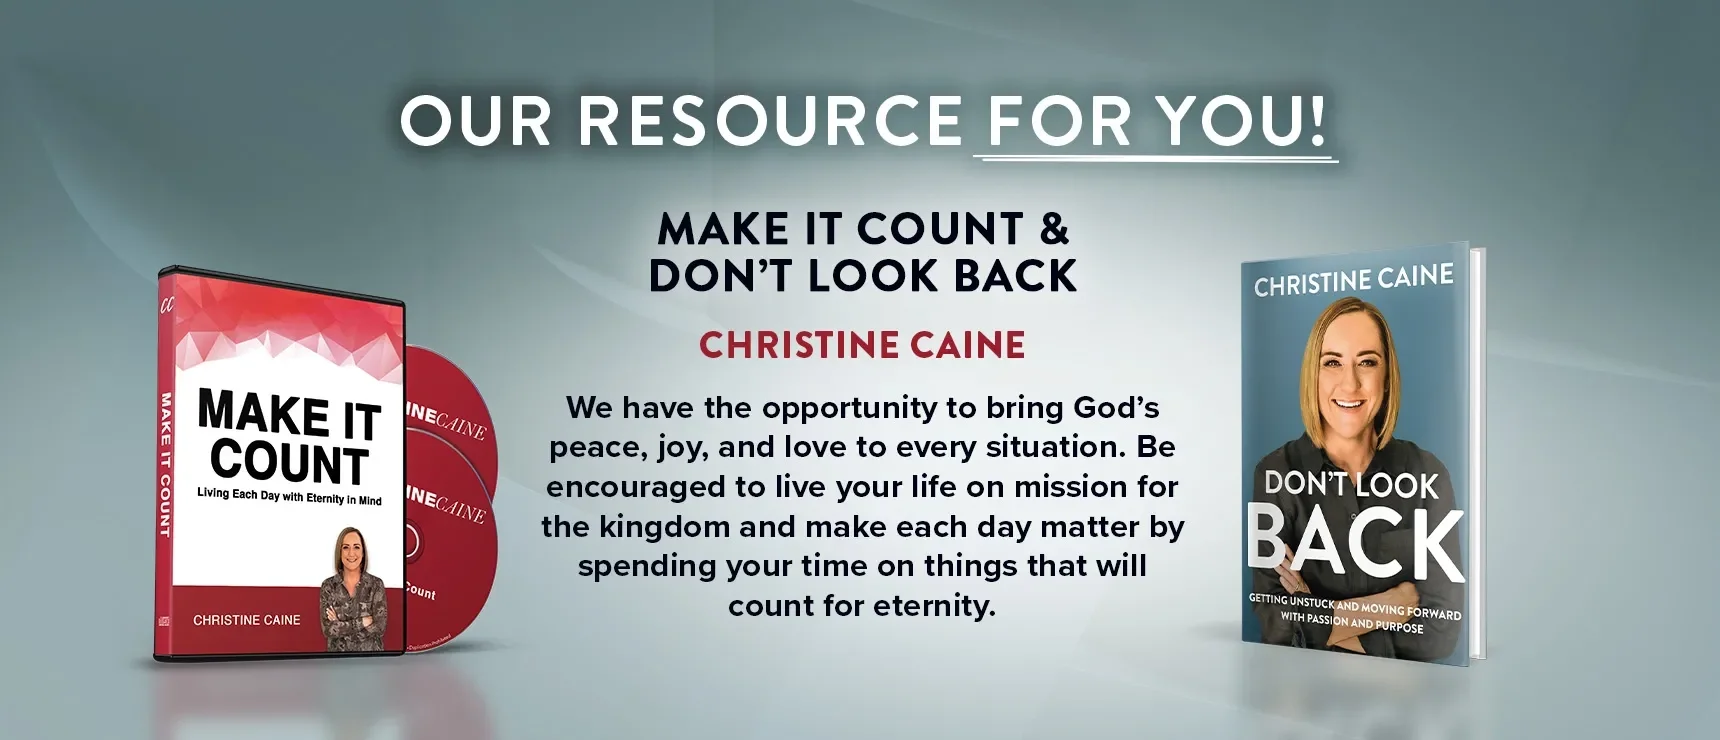 Make It Count + Don't Look Back by Christine Caine